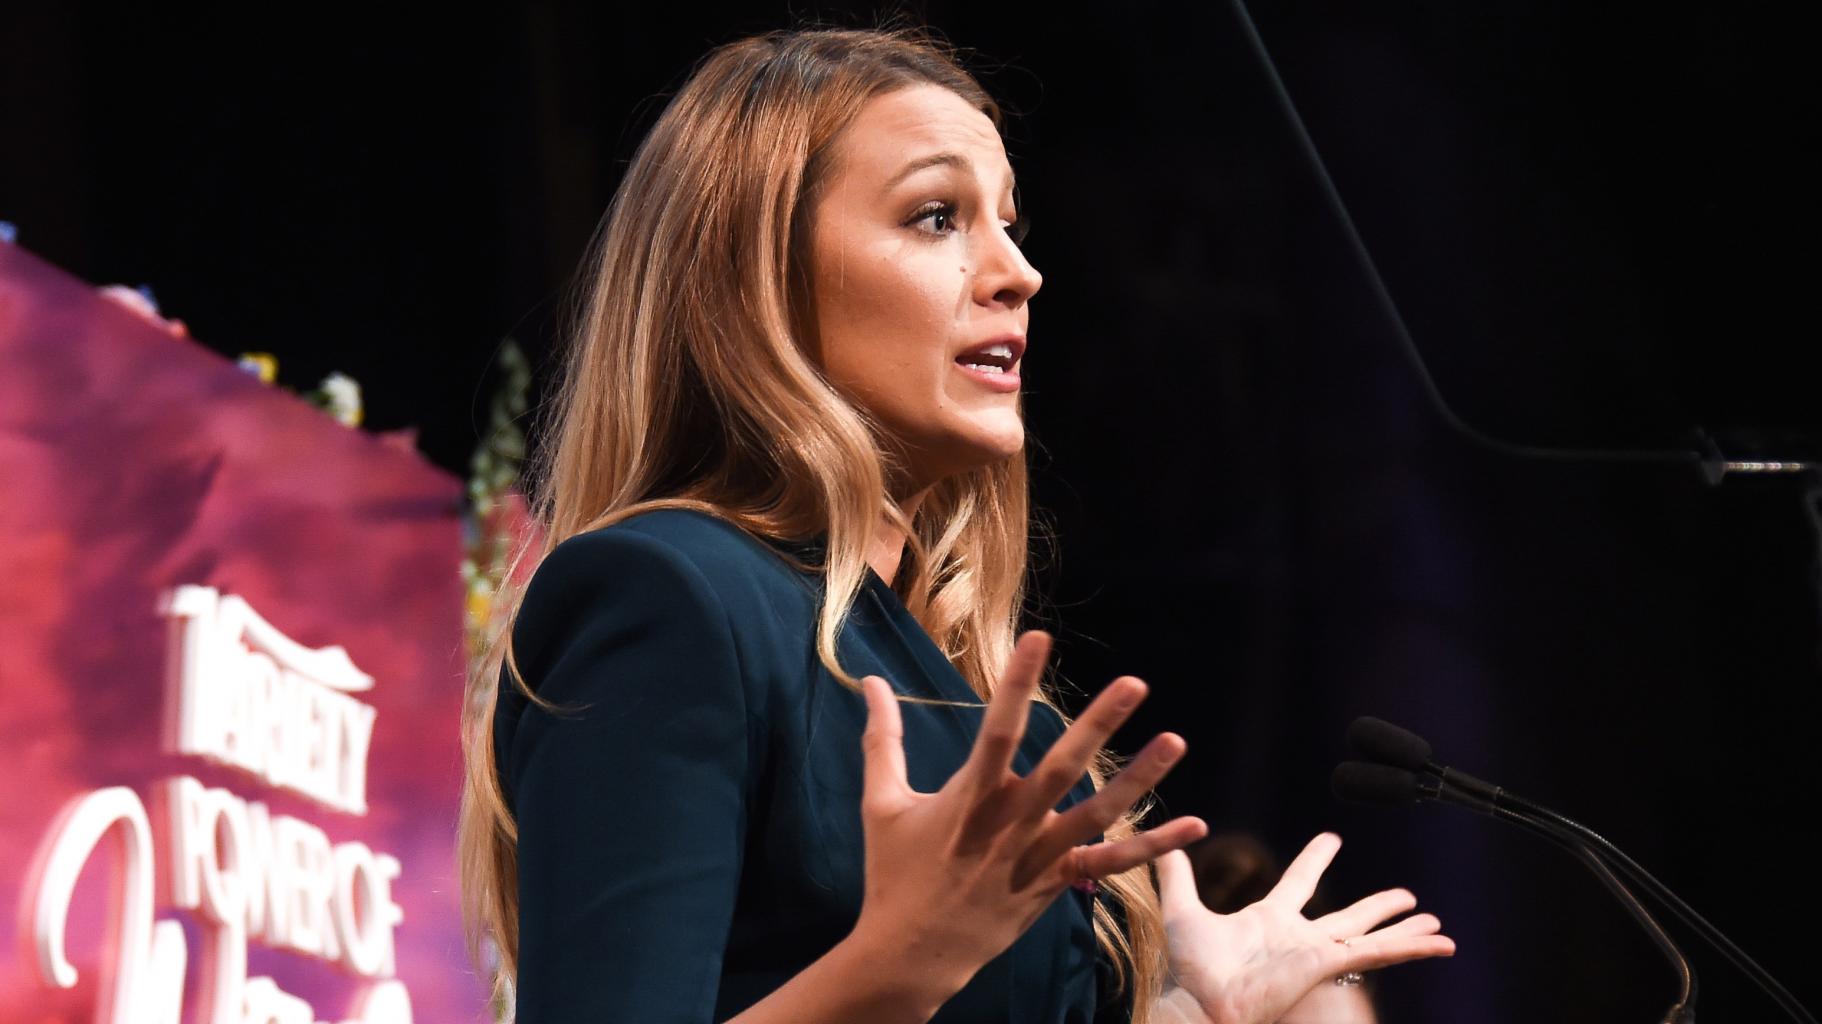 Blake Lively Tells Off Reporter for Asking About Fashion at Varietyâ€™s Power of Women Event